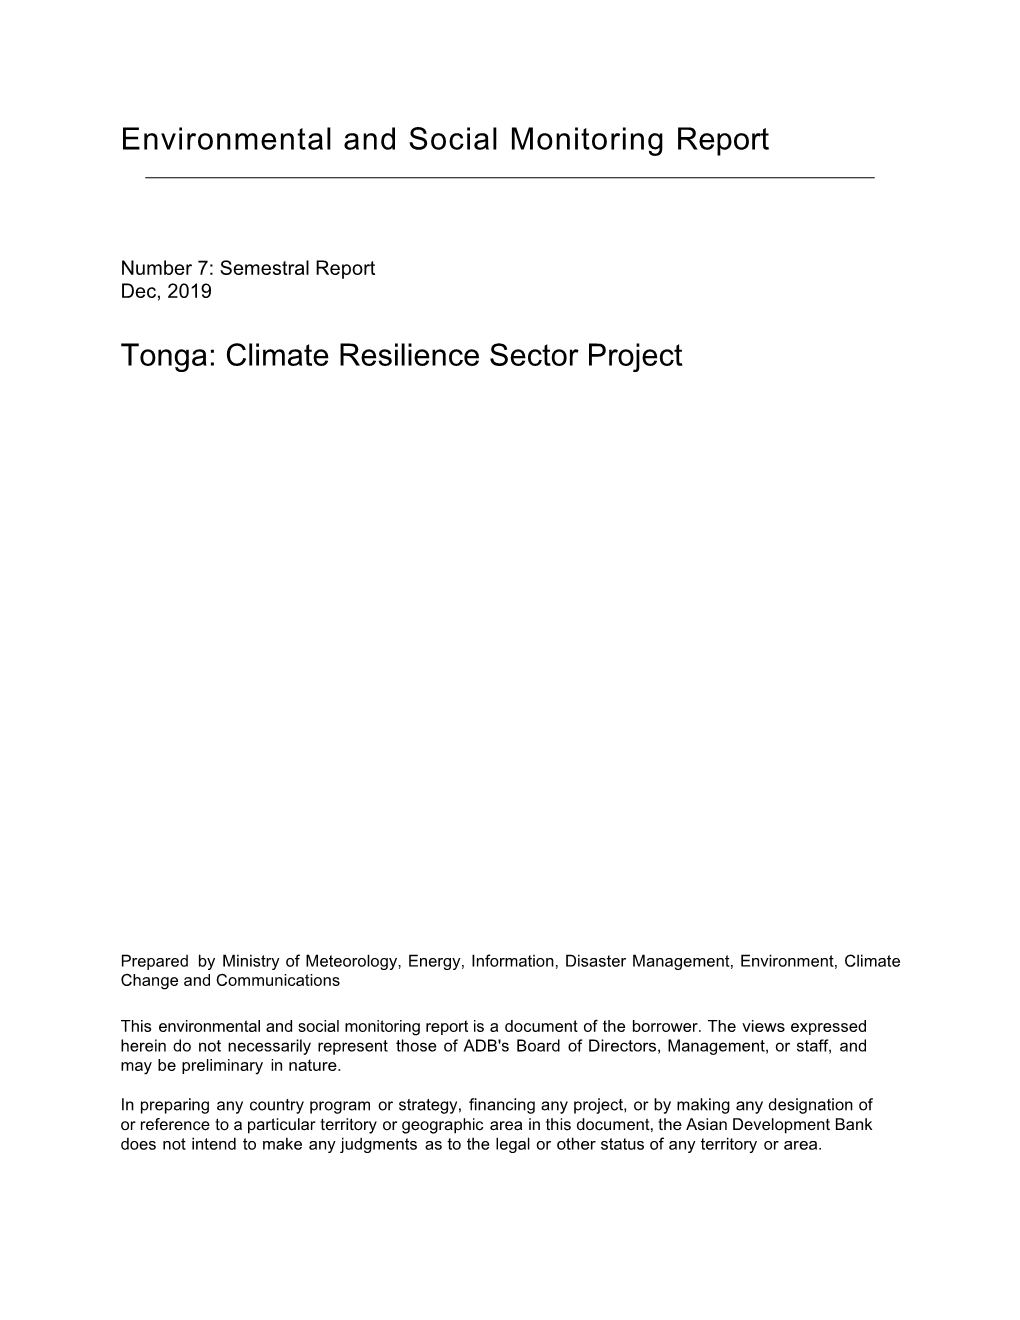 Tonga: Climate Resilience Sector Project